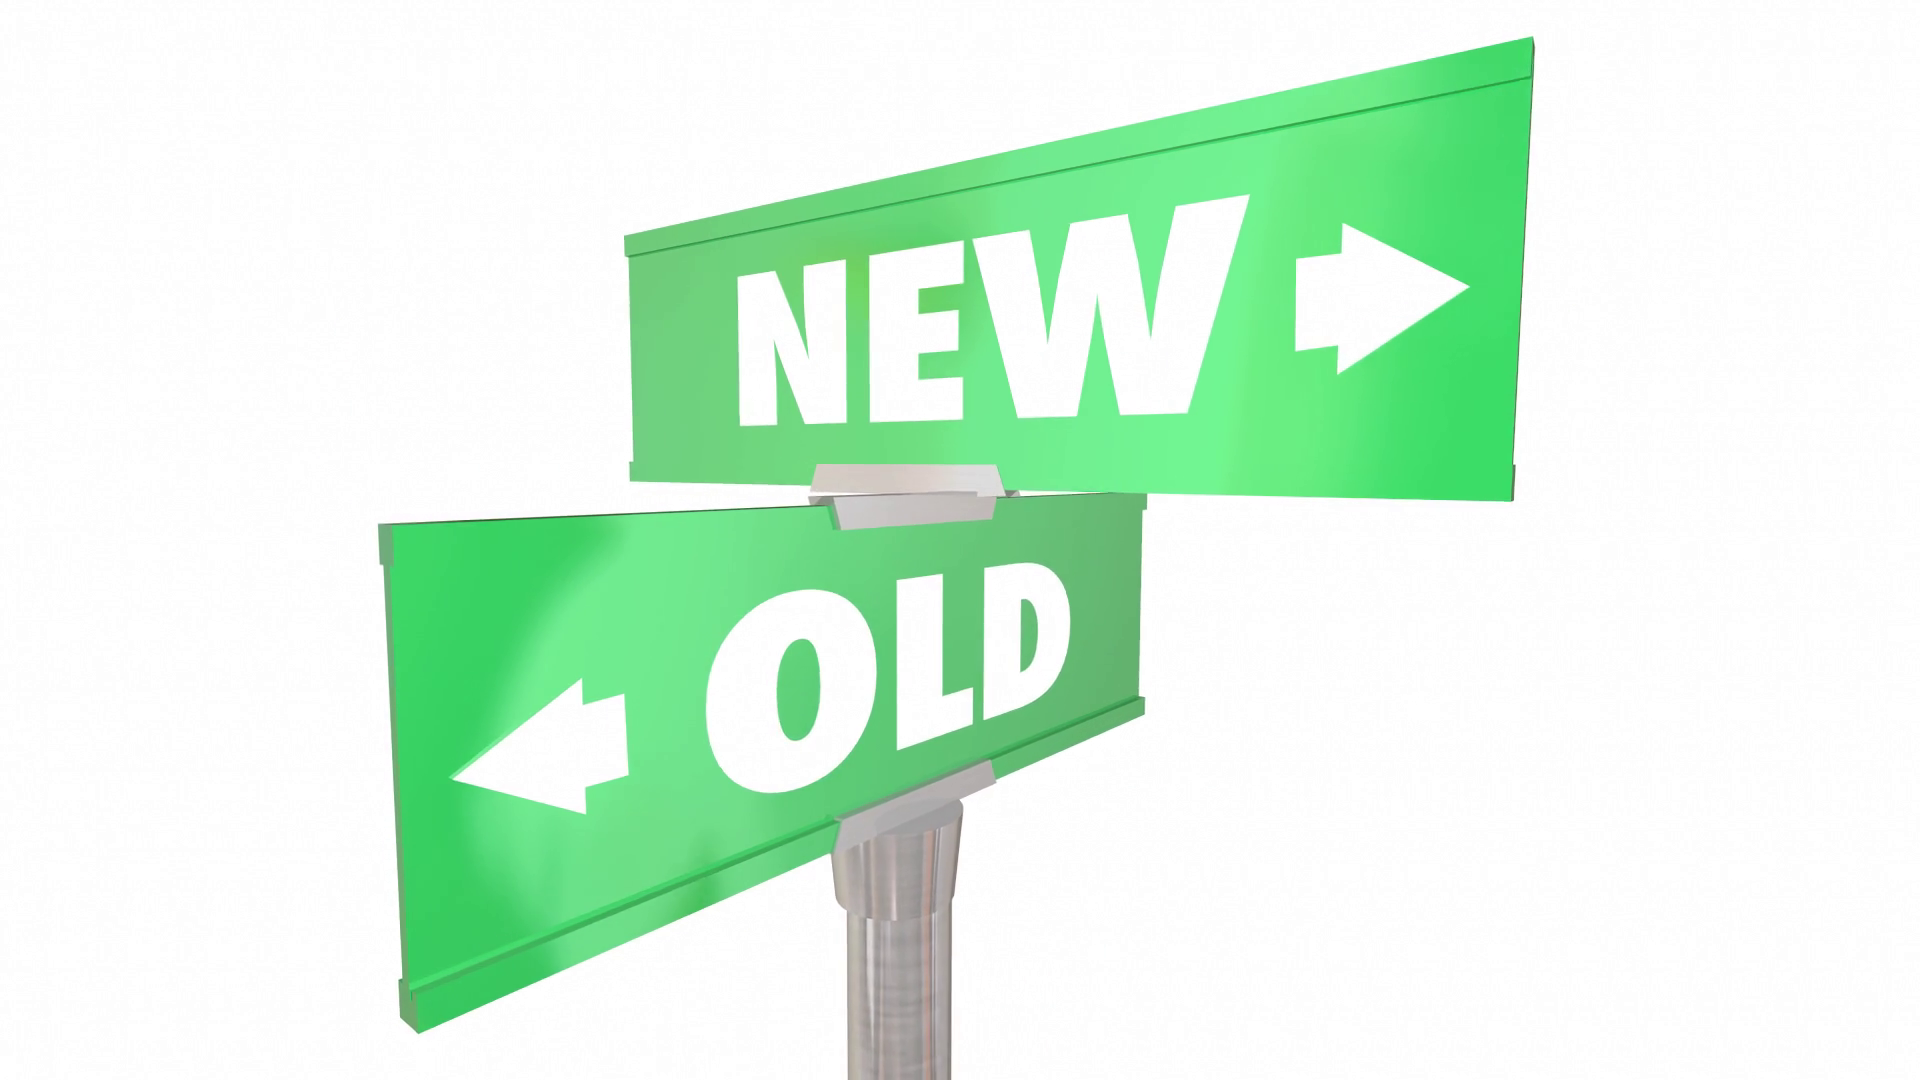 New Vs Old Two 2 Way Road Street Signs 3D Animation Motion Background   Videoblocks - Street Signs, Transparent background PNG HD thumbnail